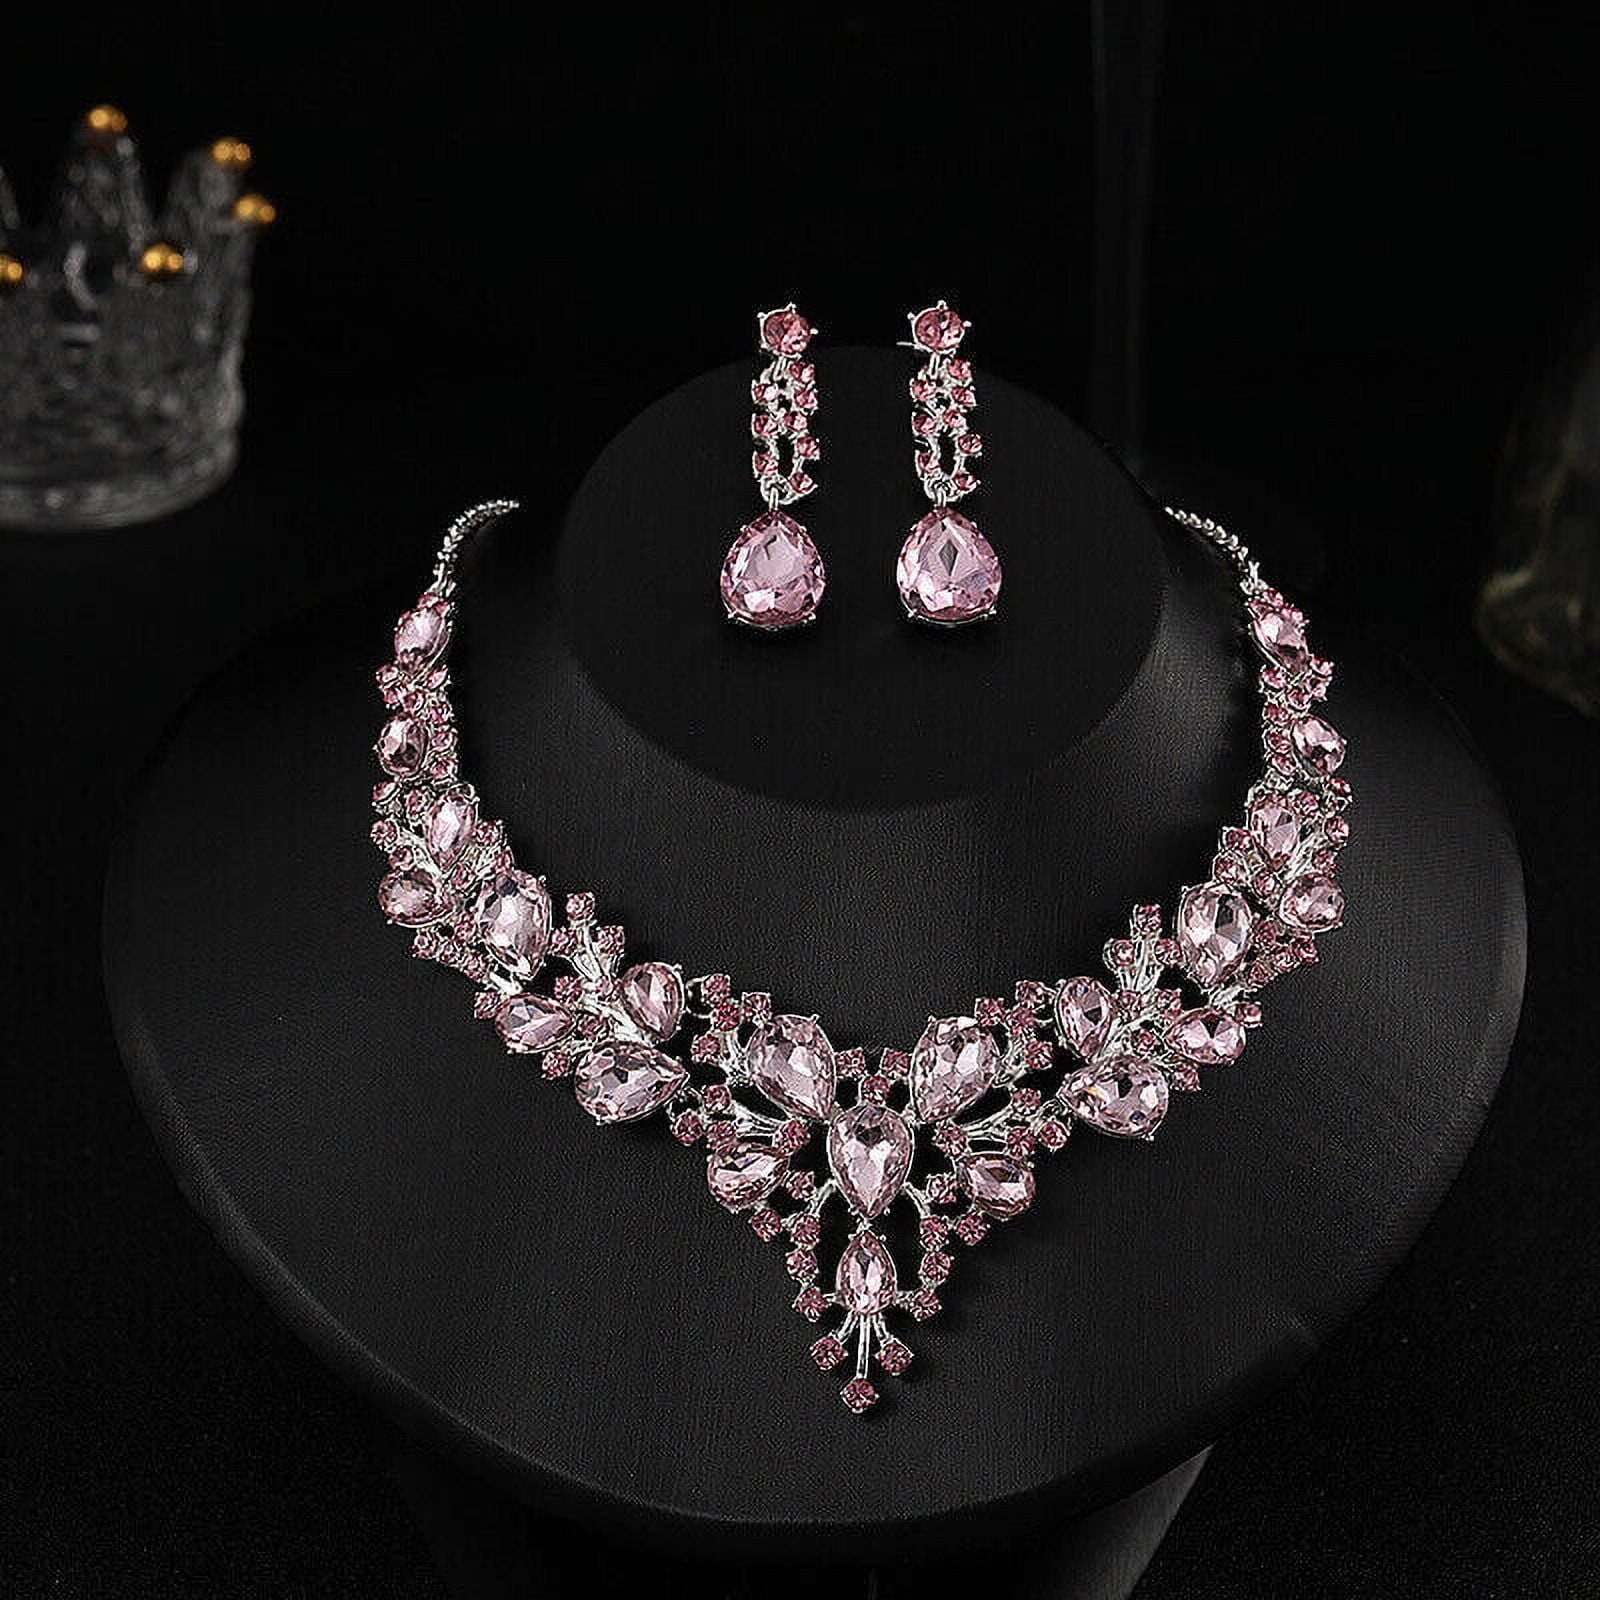 Bridal Wedding Rhinestone Crystal Cubic Necklace Earrings Jewelry Set Party, Women's, Size: One size, Pink